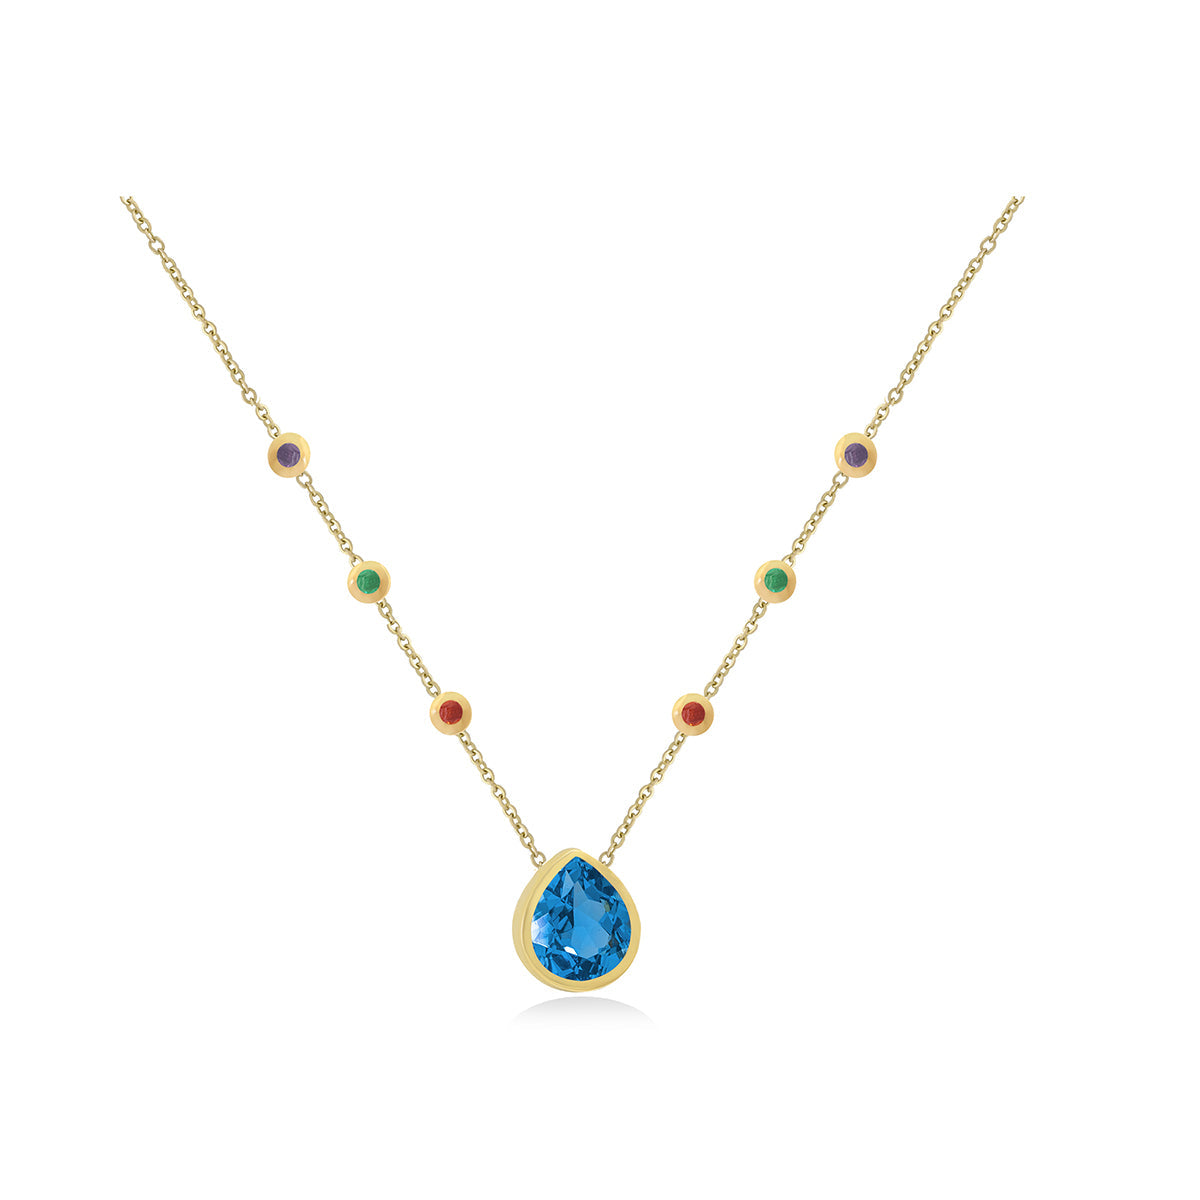 Chain Necklace Inlaid With Colorful Gem Stones In 18K Gold - Yellow Gold